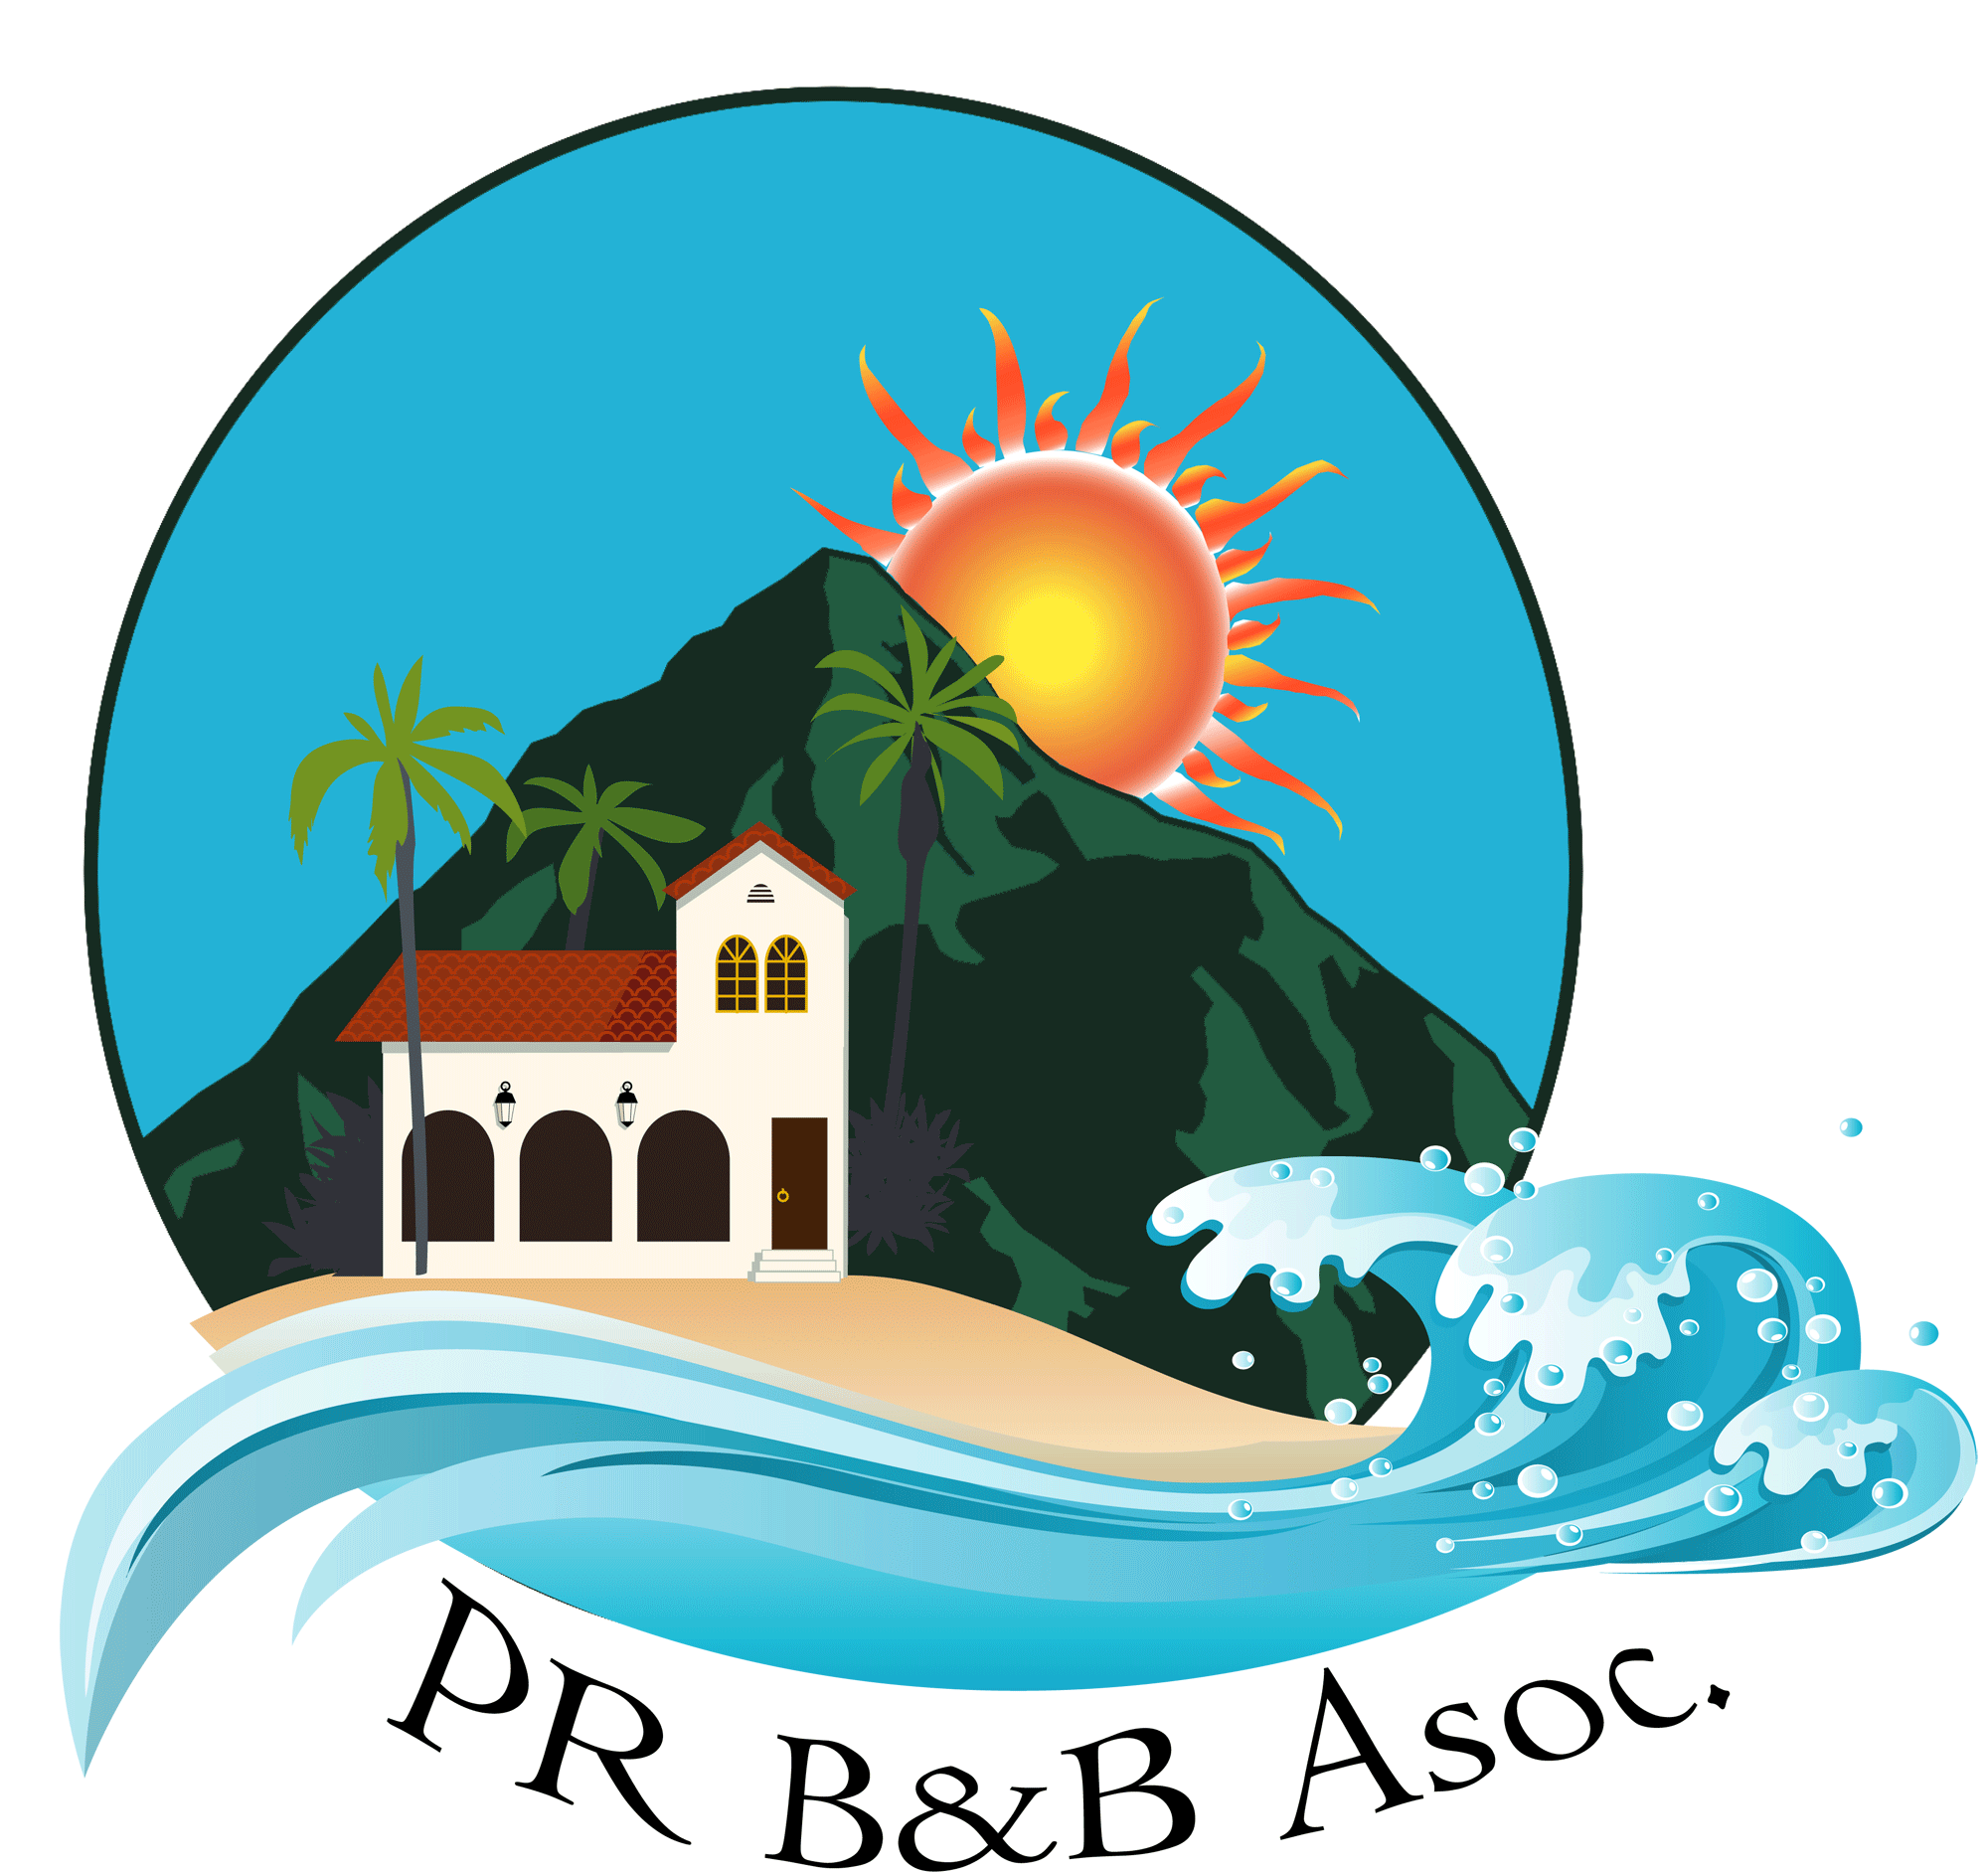 Member of Puerto Rico Bed and Breakfast Assoc.